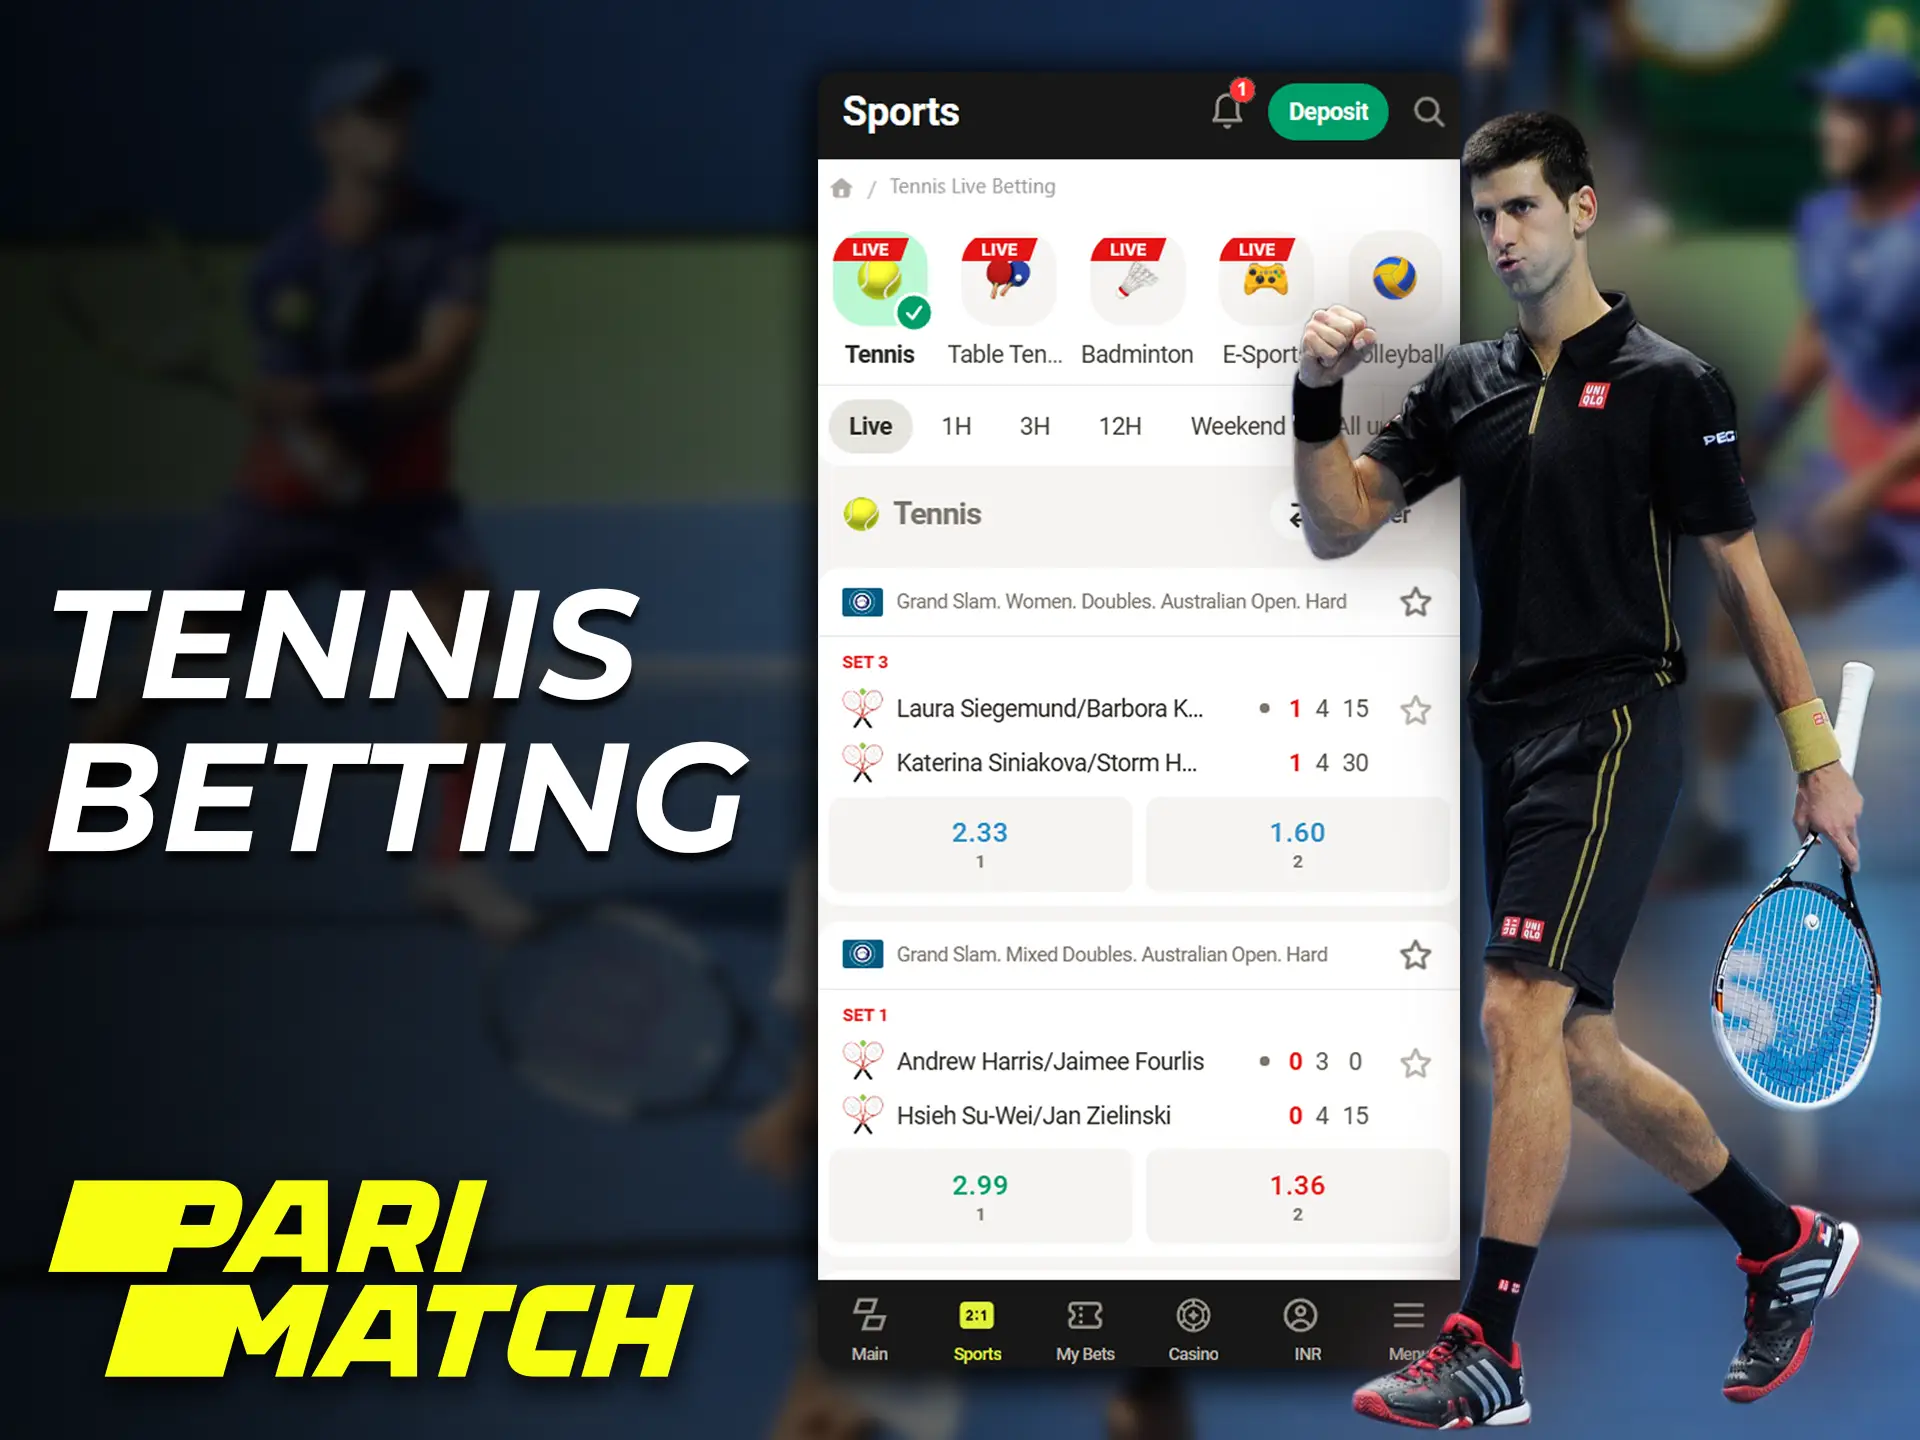 Tennis fans can place their bets on the Parimatch app.